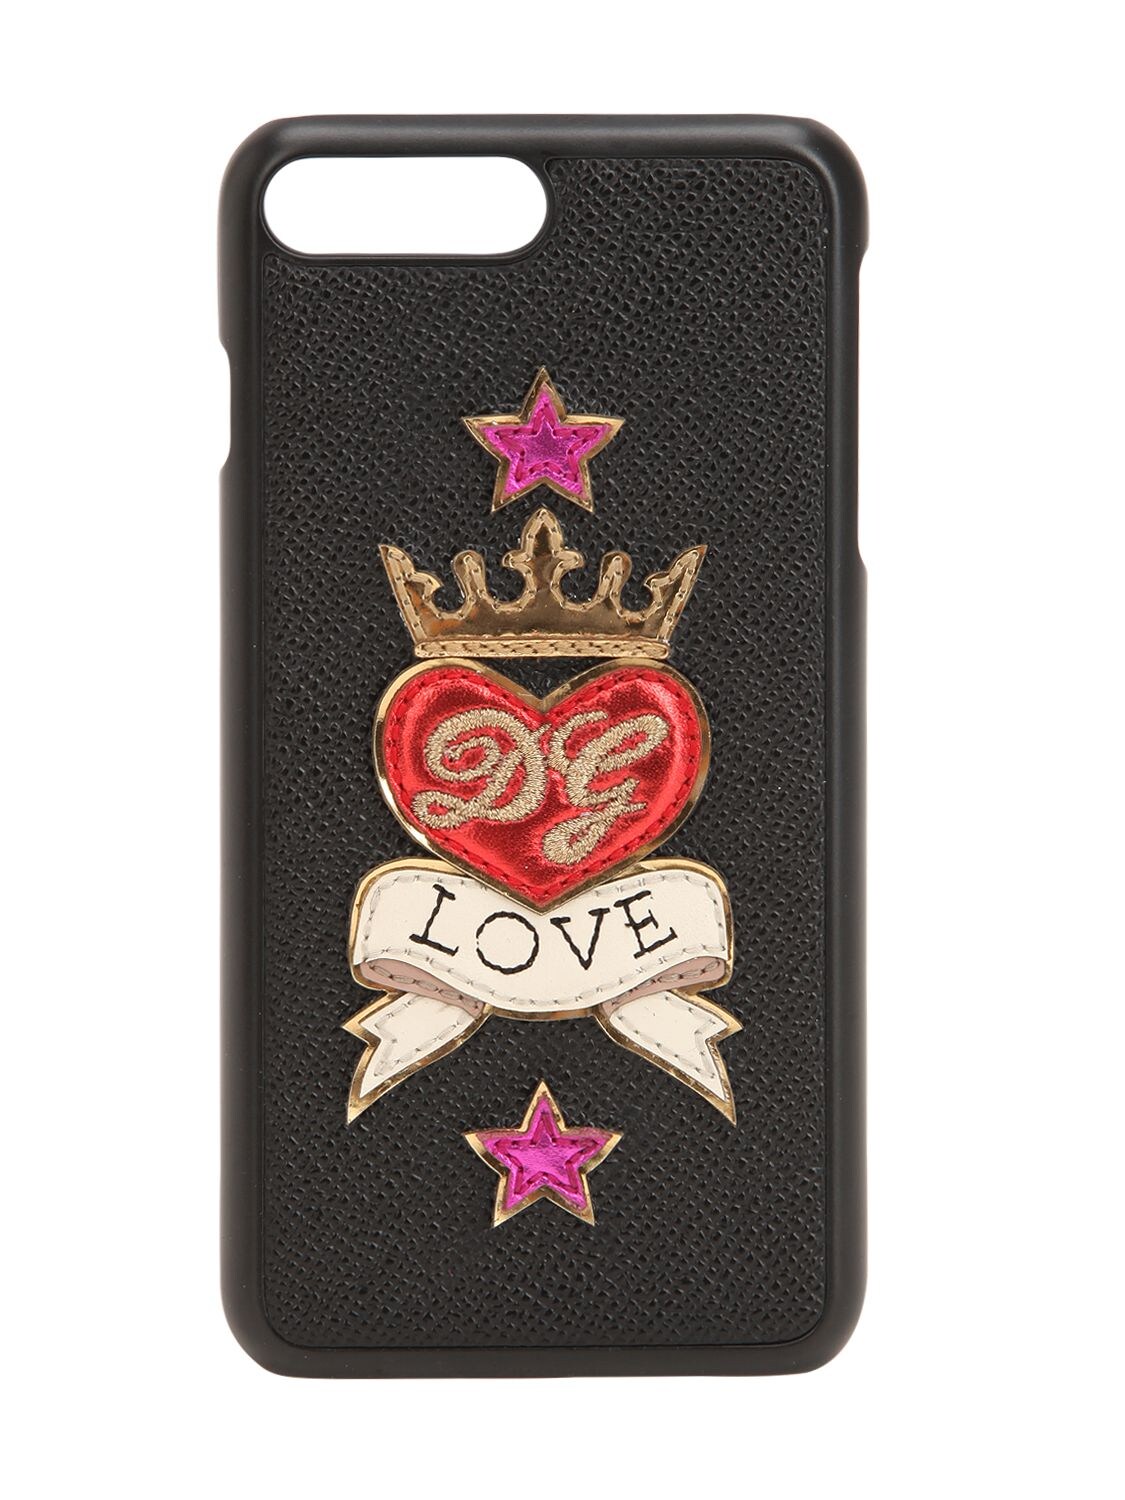 Dolce & Gabbana Love Leather Iphone 8 Plus Cover In Black